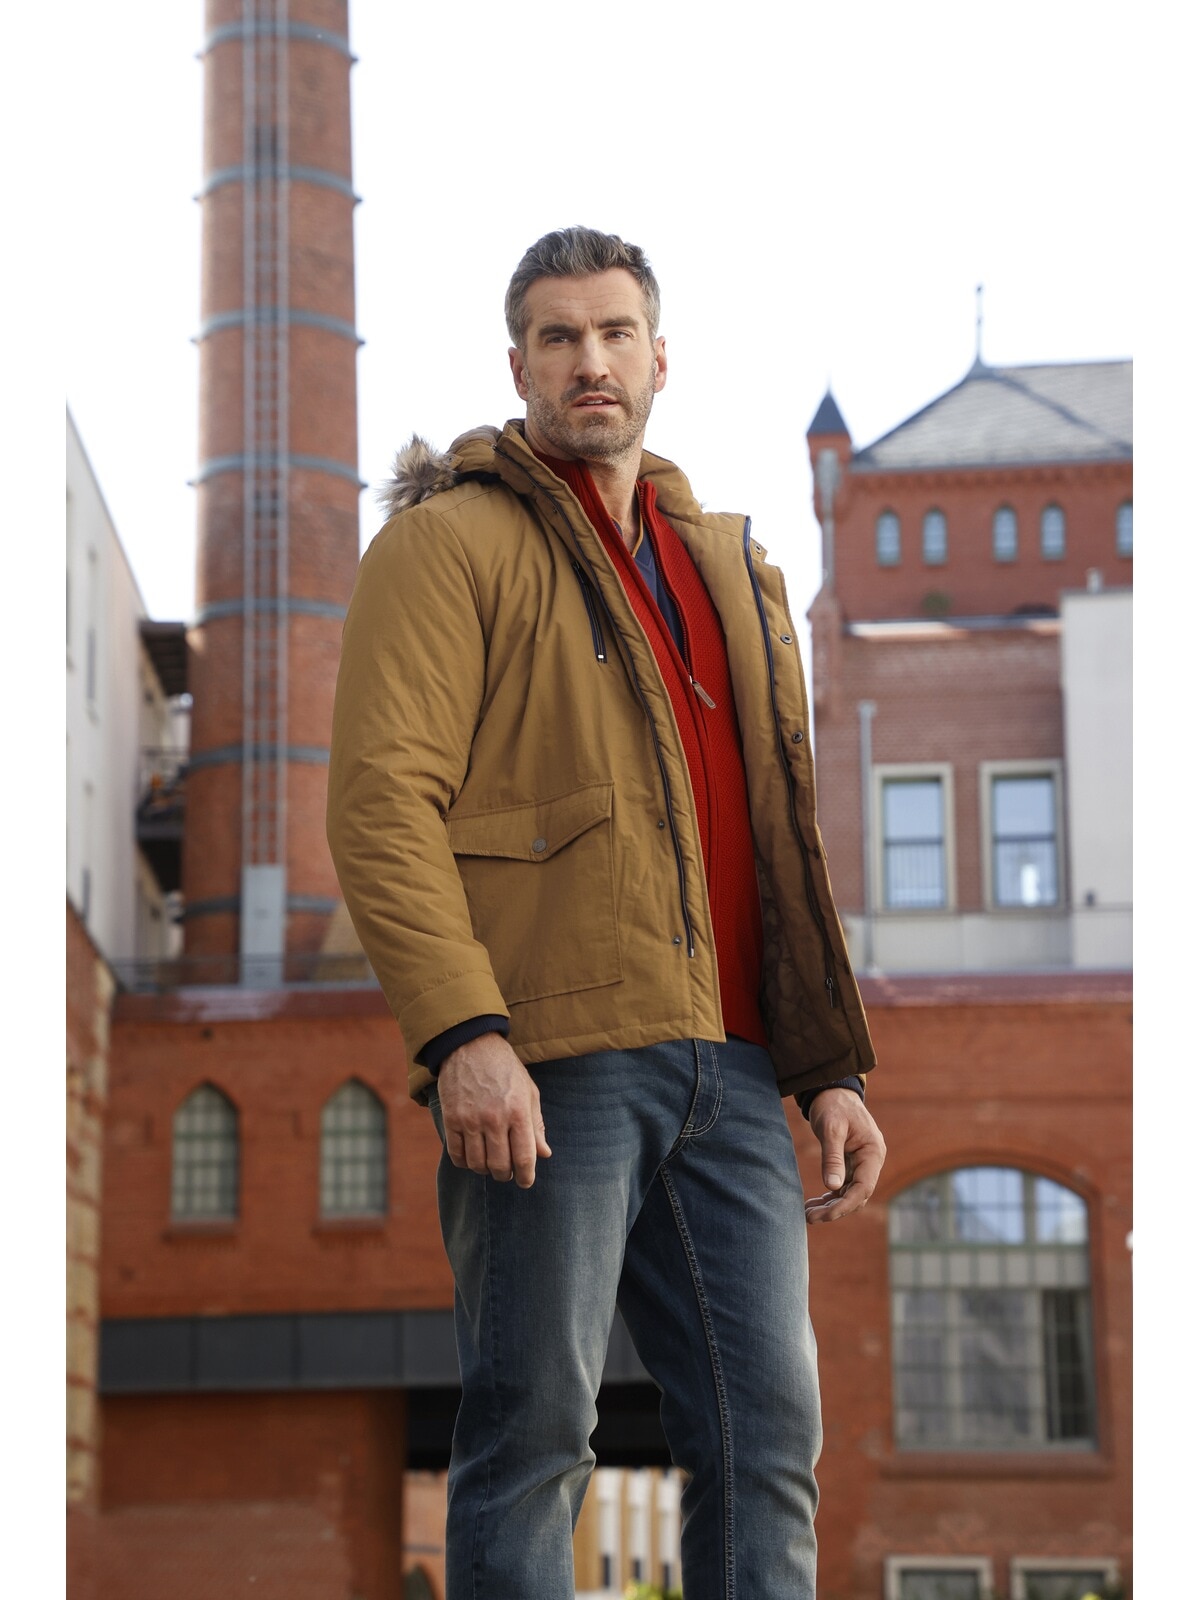 Charles Colby Outdoorjacke »Jacke SIR CLARENCE«